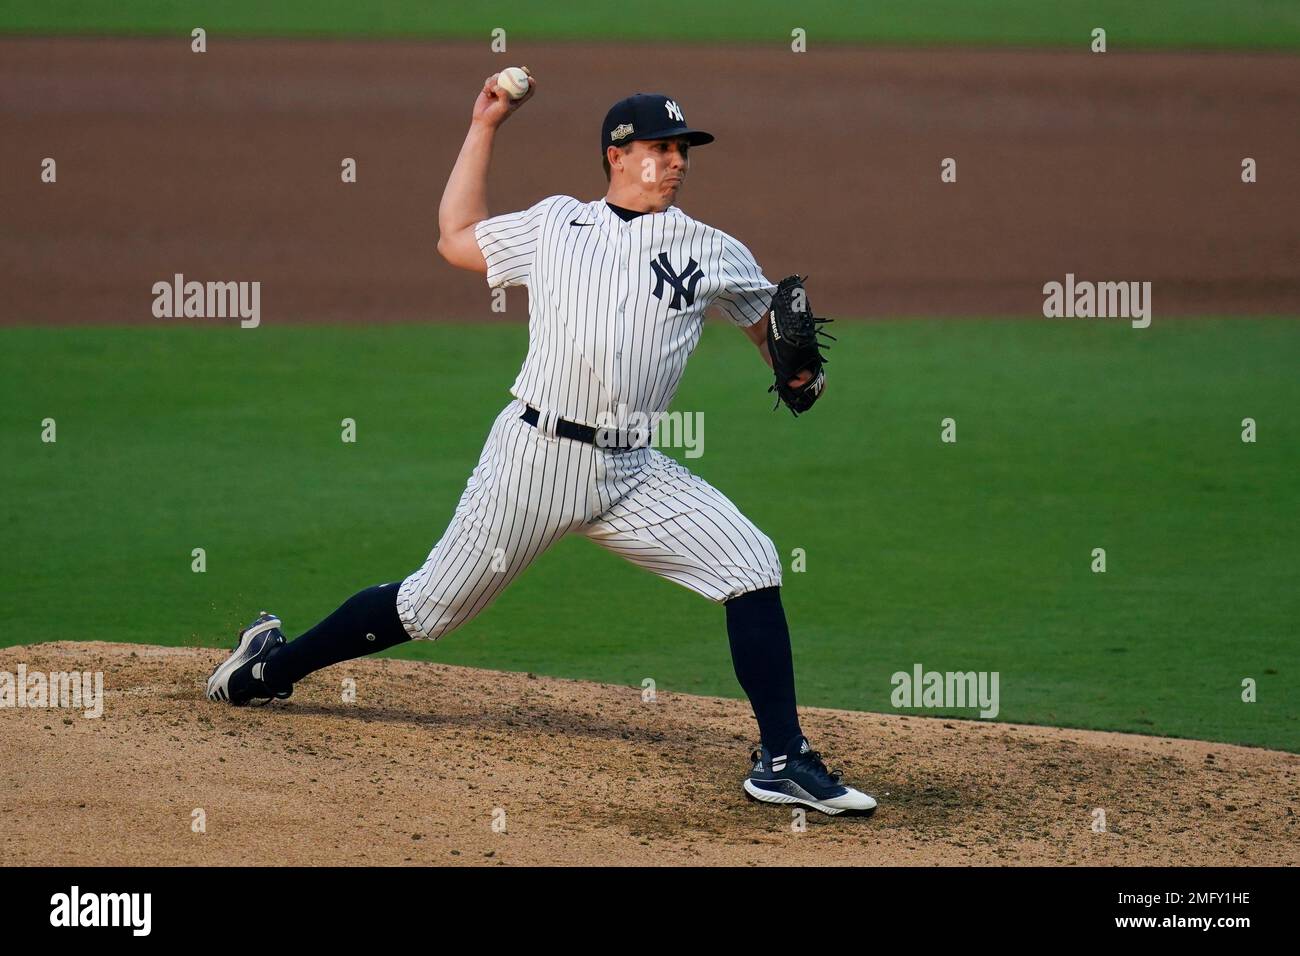 New York Yankees relief pitcher Chad Green throws against the